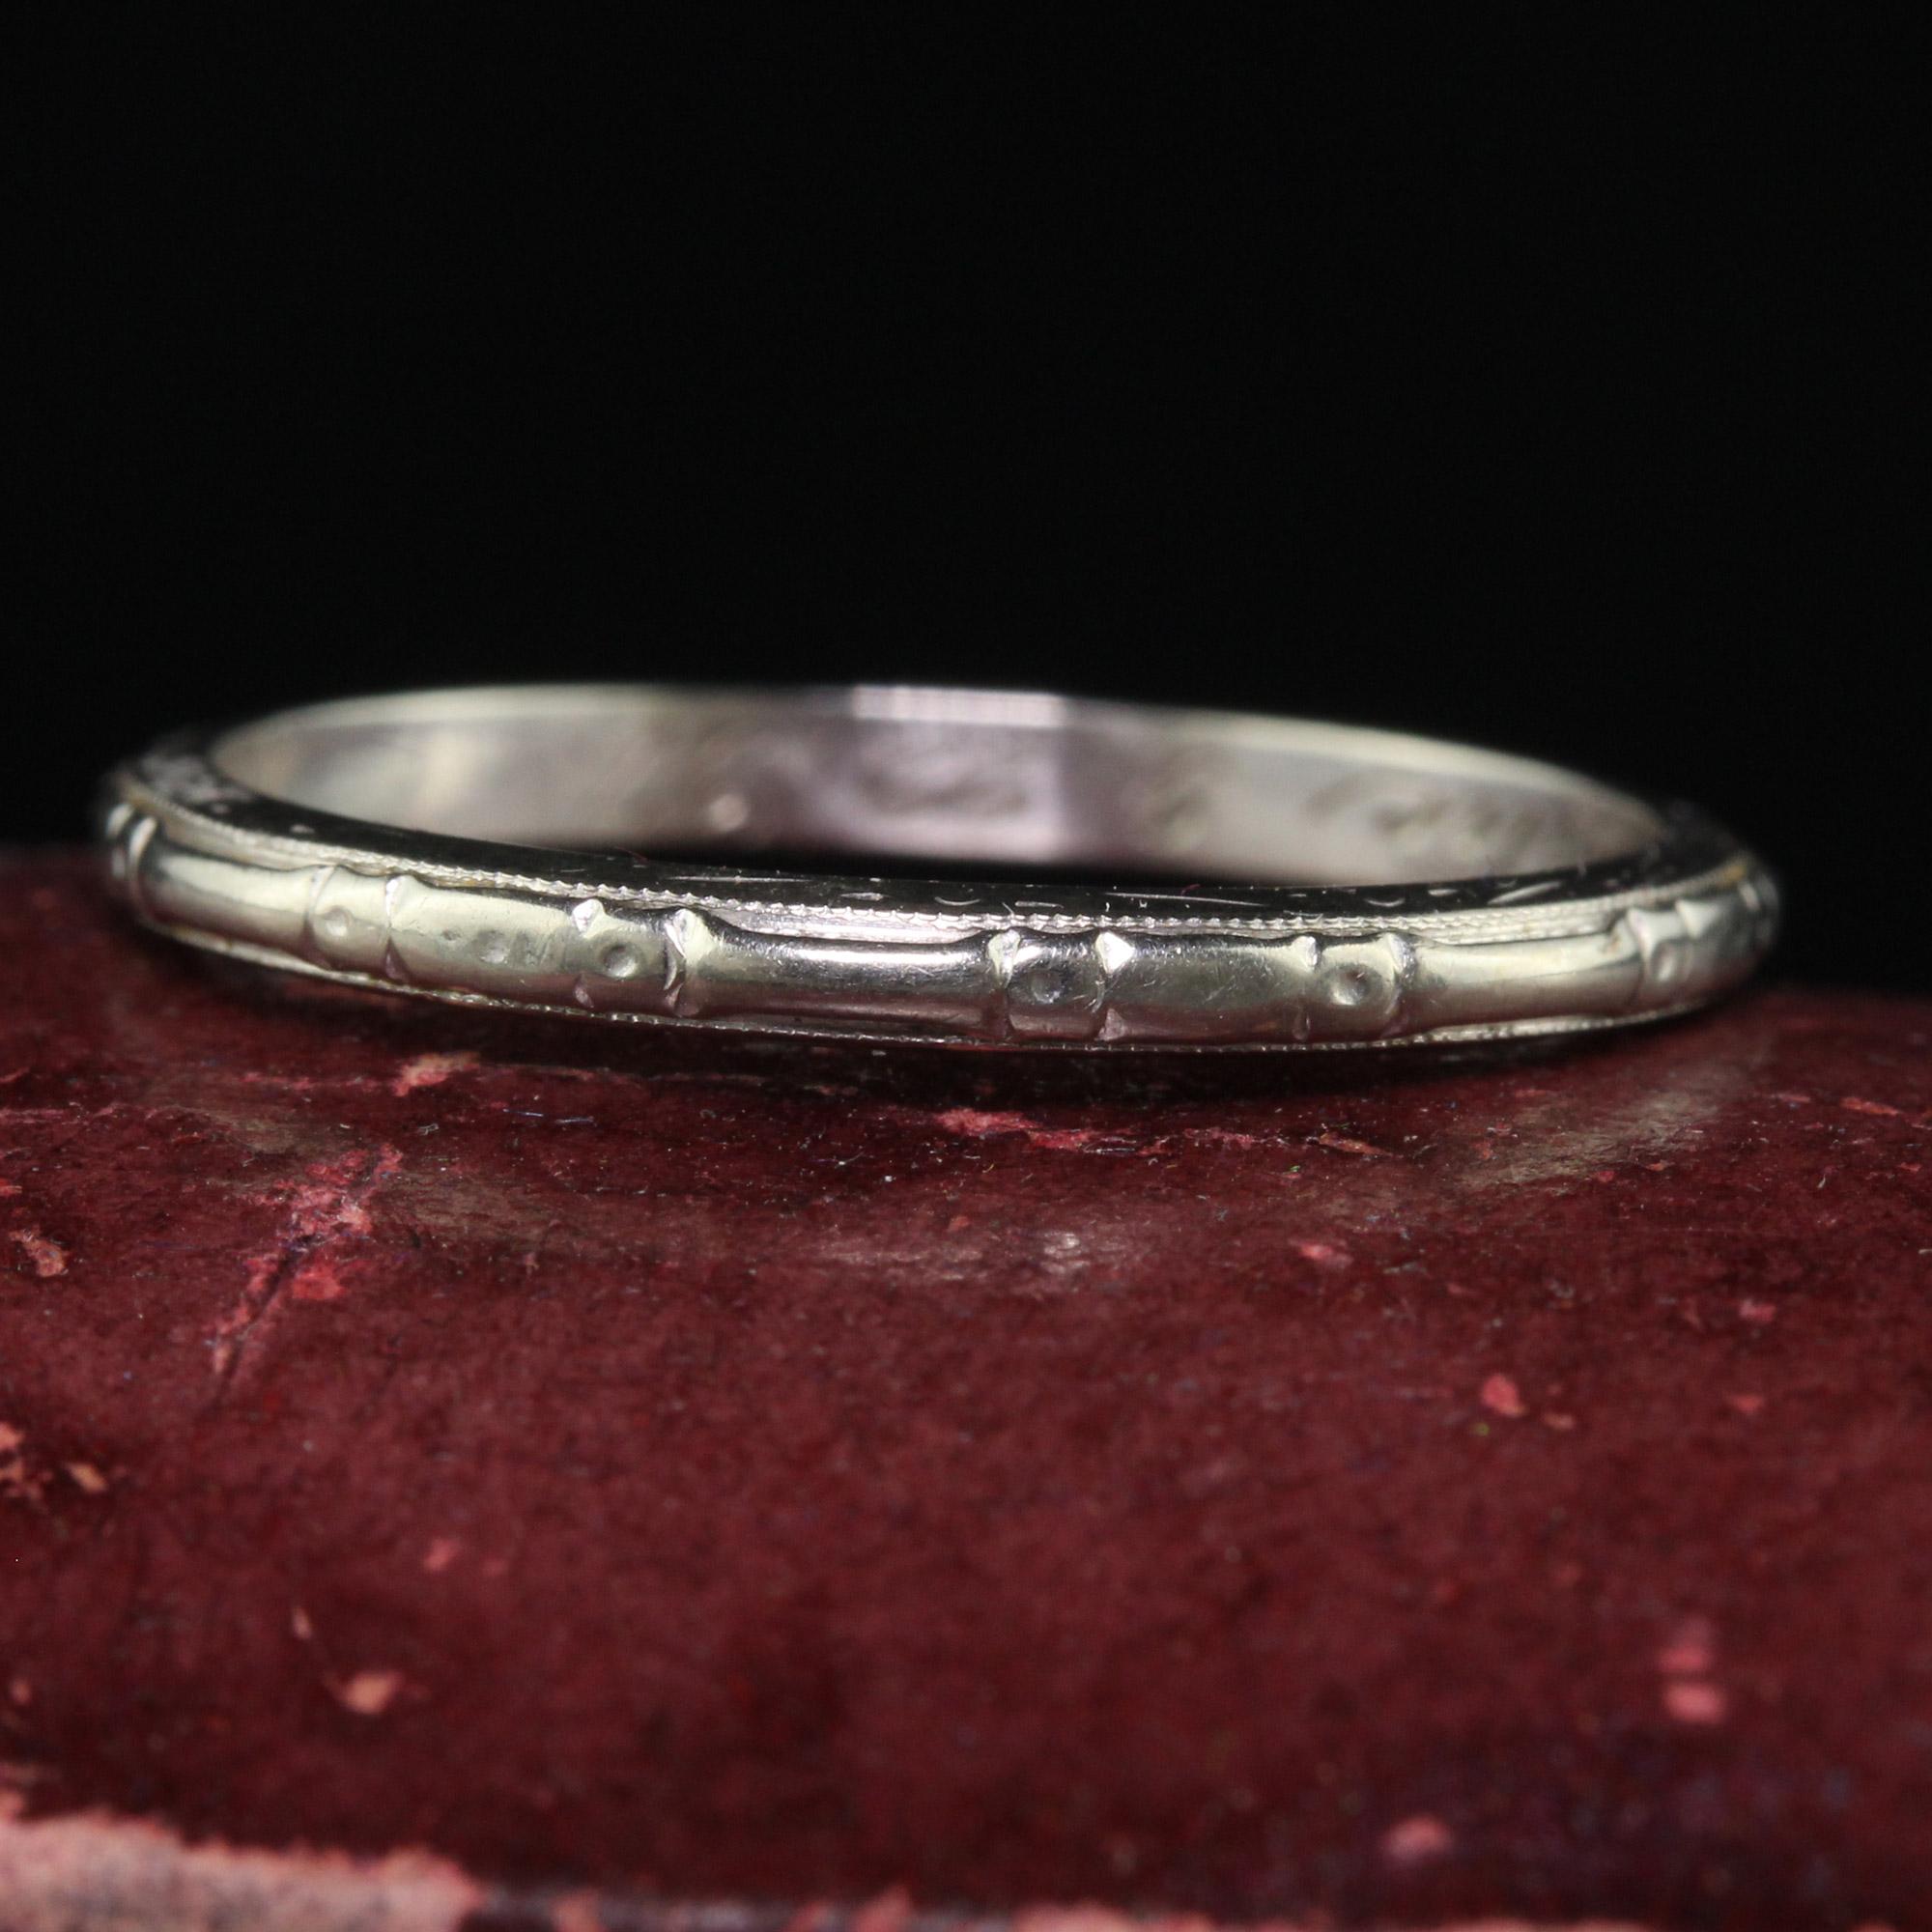 Beautiful Antique Art Deco Belais 18K White Gold Engraved Wedding Band - Size 6 1/22. This gorgeous wedding band is crafted in 18k white gold. The band has patterned engravings going around the entire ring and are still visible. The ring is engraved